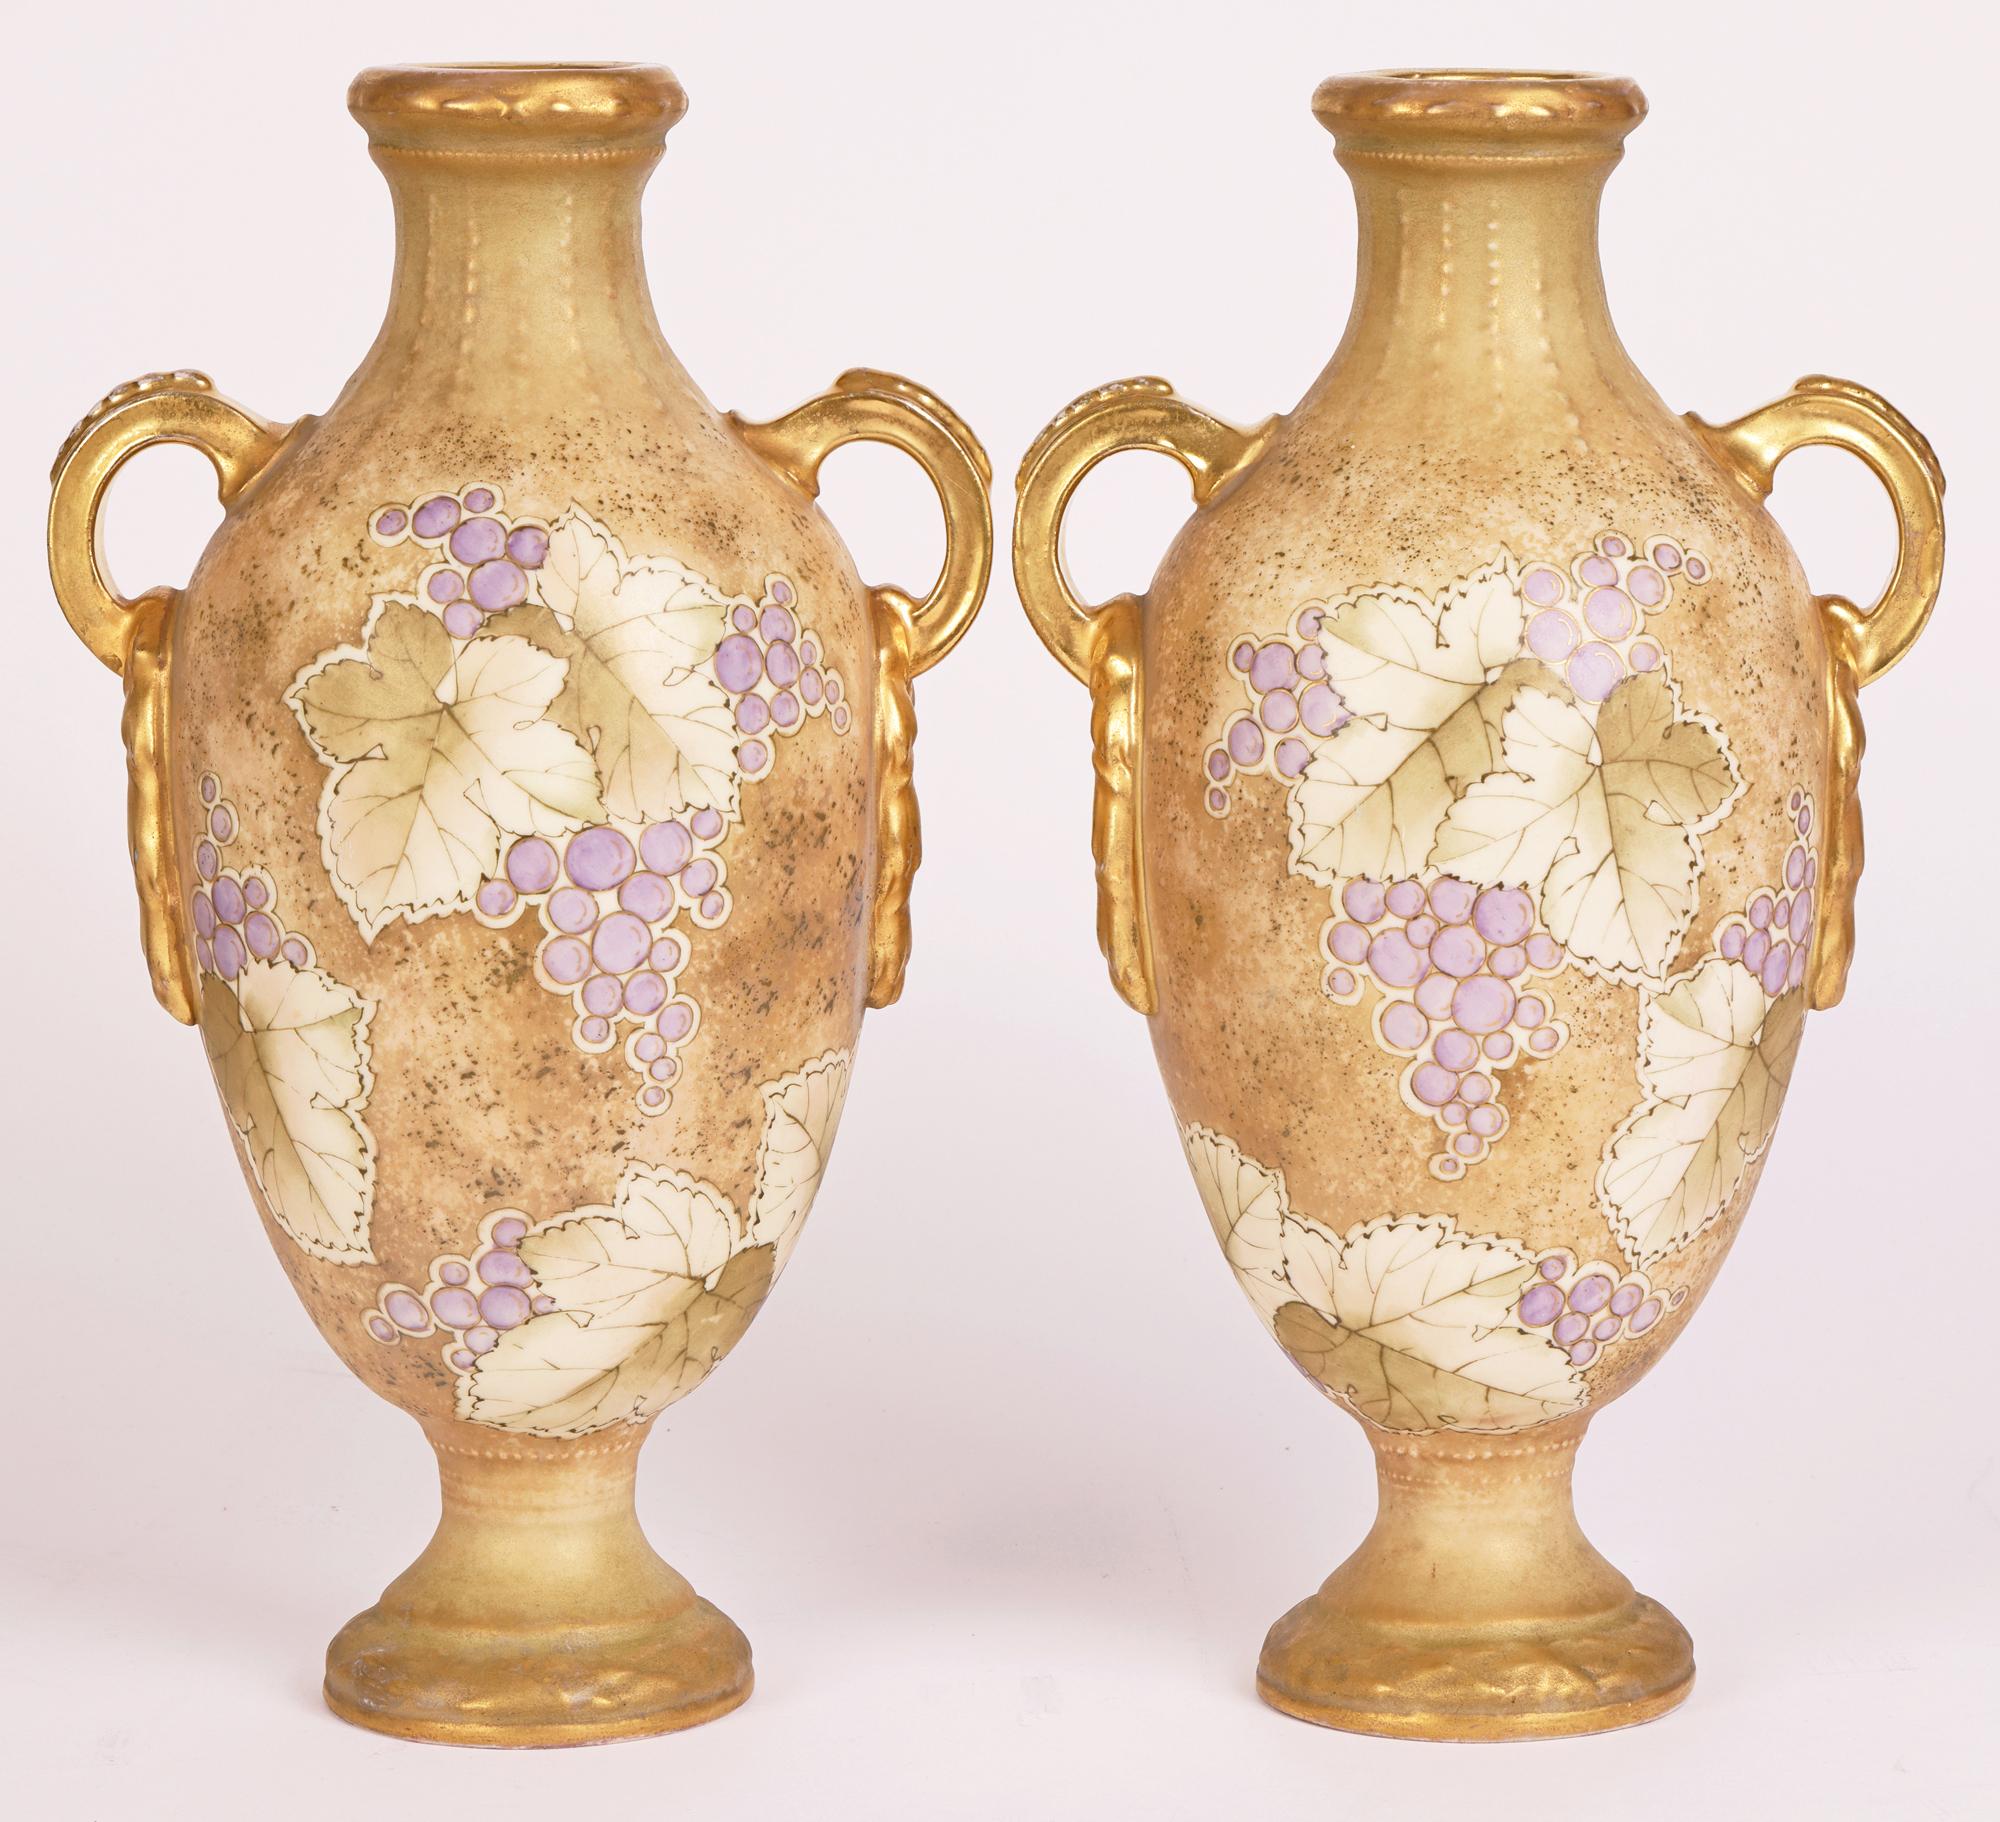 Turn Teplitz RSK Amphora Pair Art Nouveau Hand-Painted Twin Handled Vases For Sale 13